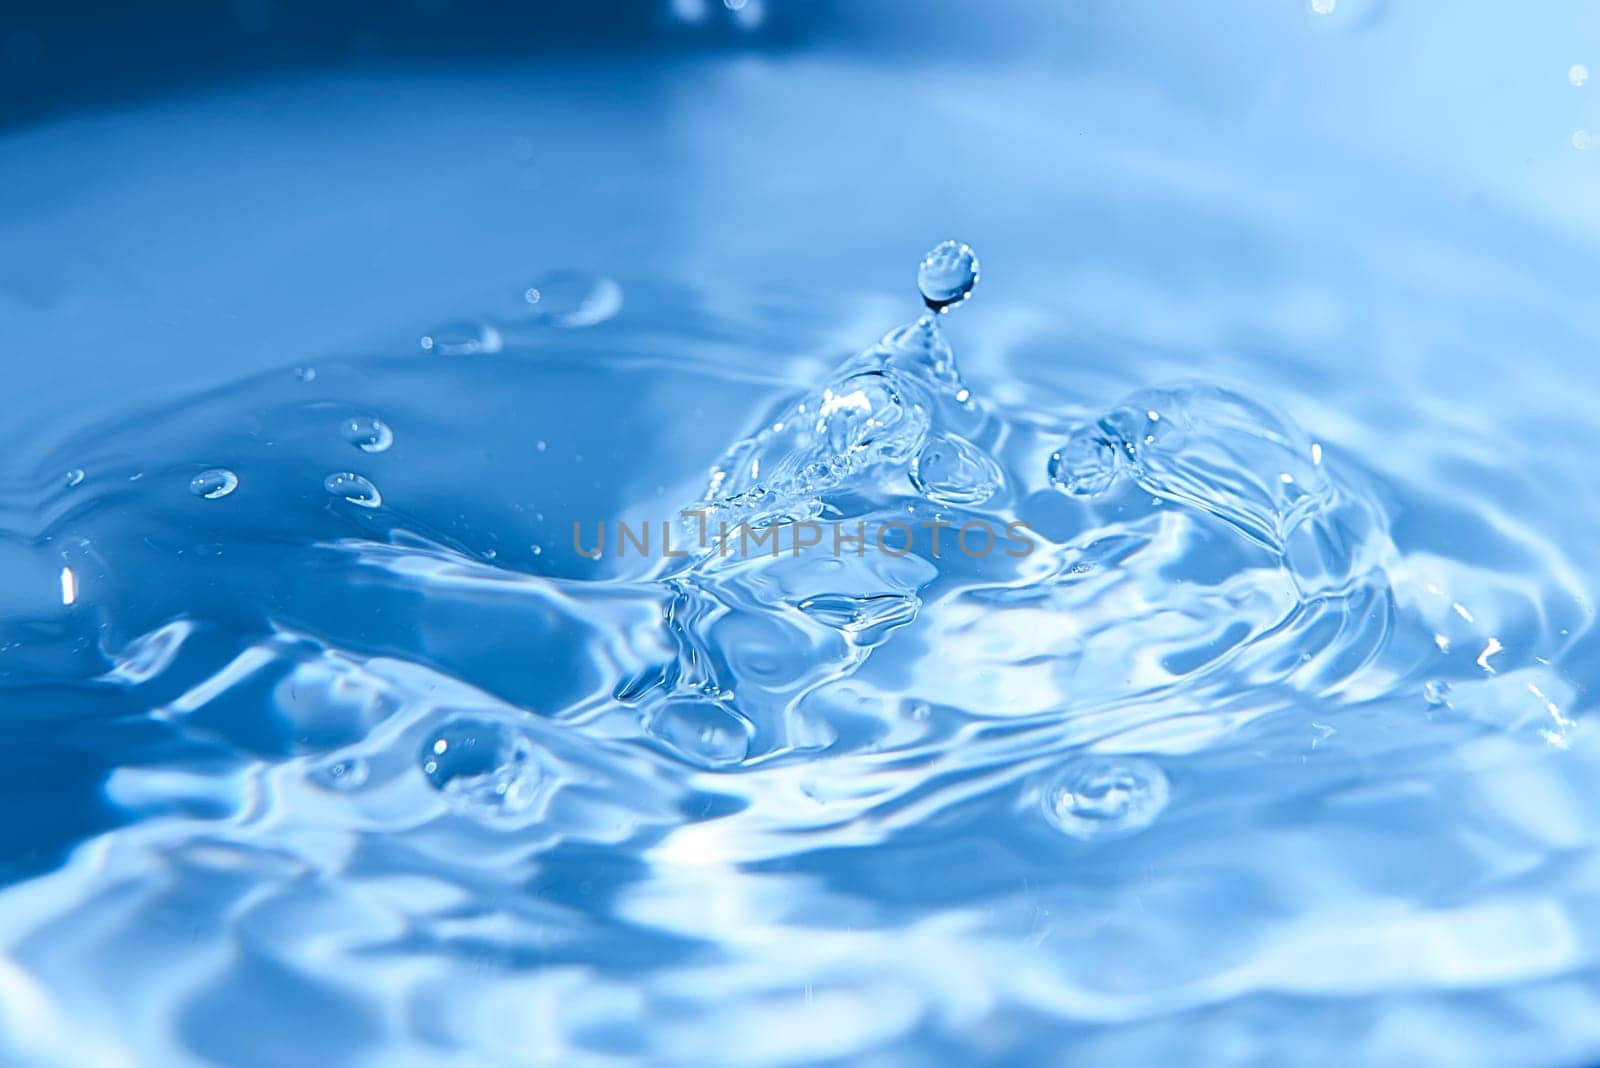 165.One or more drops of water splashing into waves and undefined shapes. Wallpaper by raul_ruiz